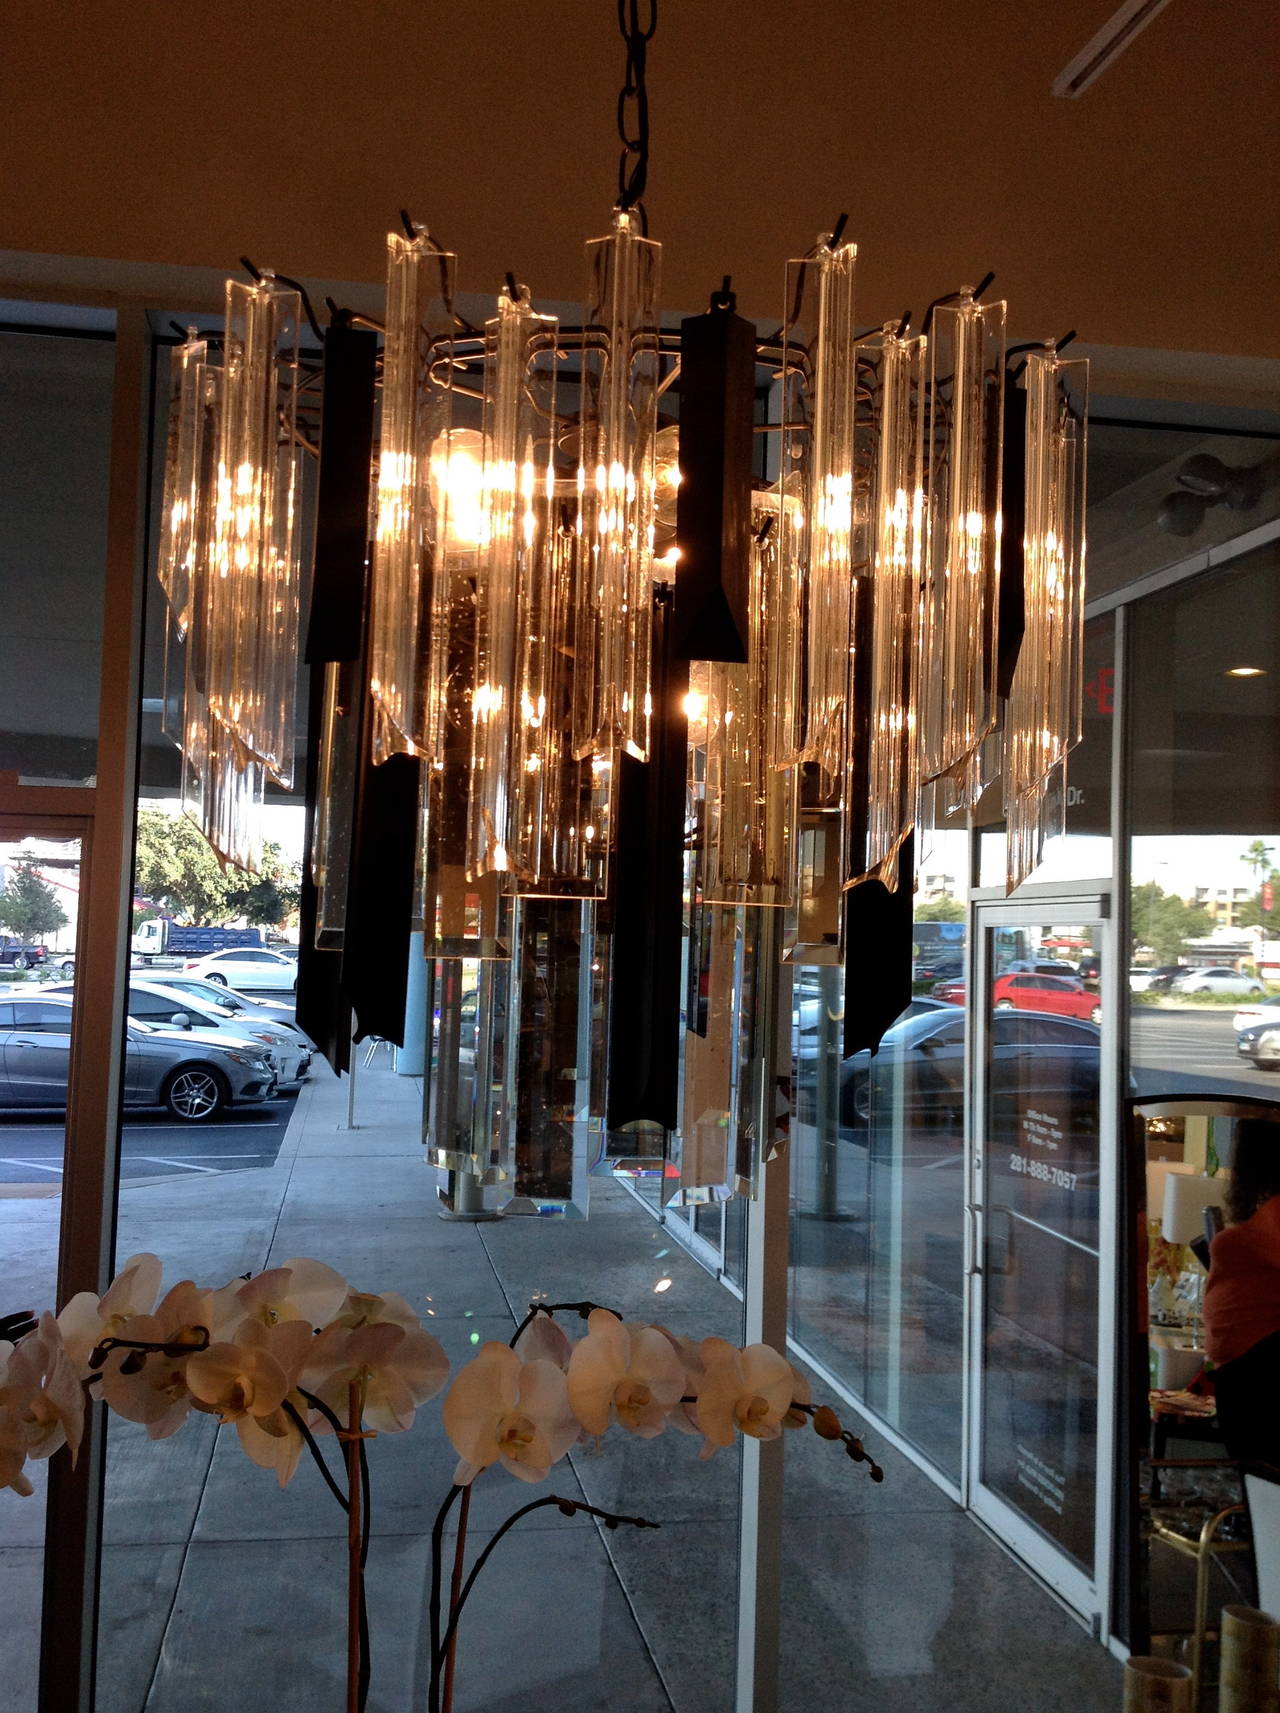 This chandelier is quite unique and is a stunner in its diverse clarity, with its opaque, clear and mirrored prisms.  It can be quite dramatic in any setting or just simple, clean and bold.  This piece would look perfect in any area of a home. 